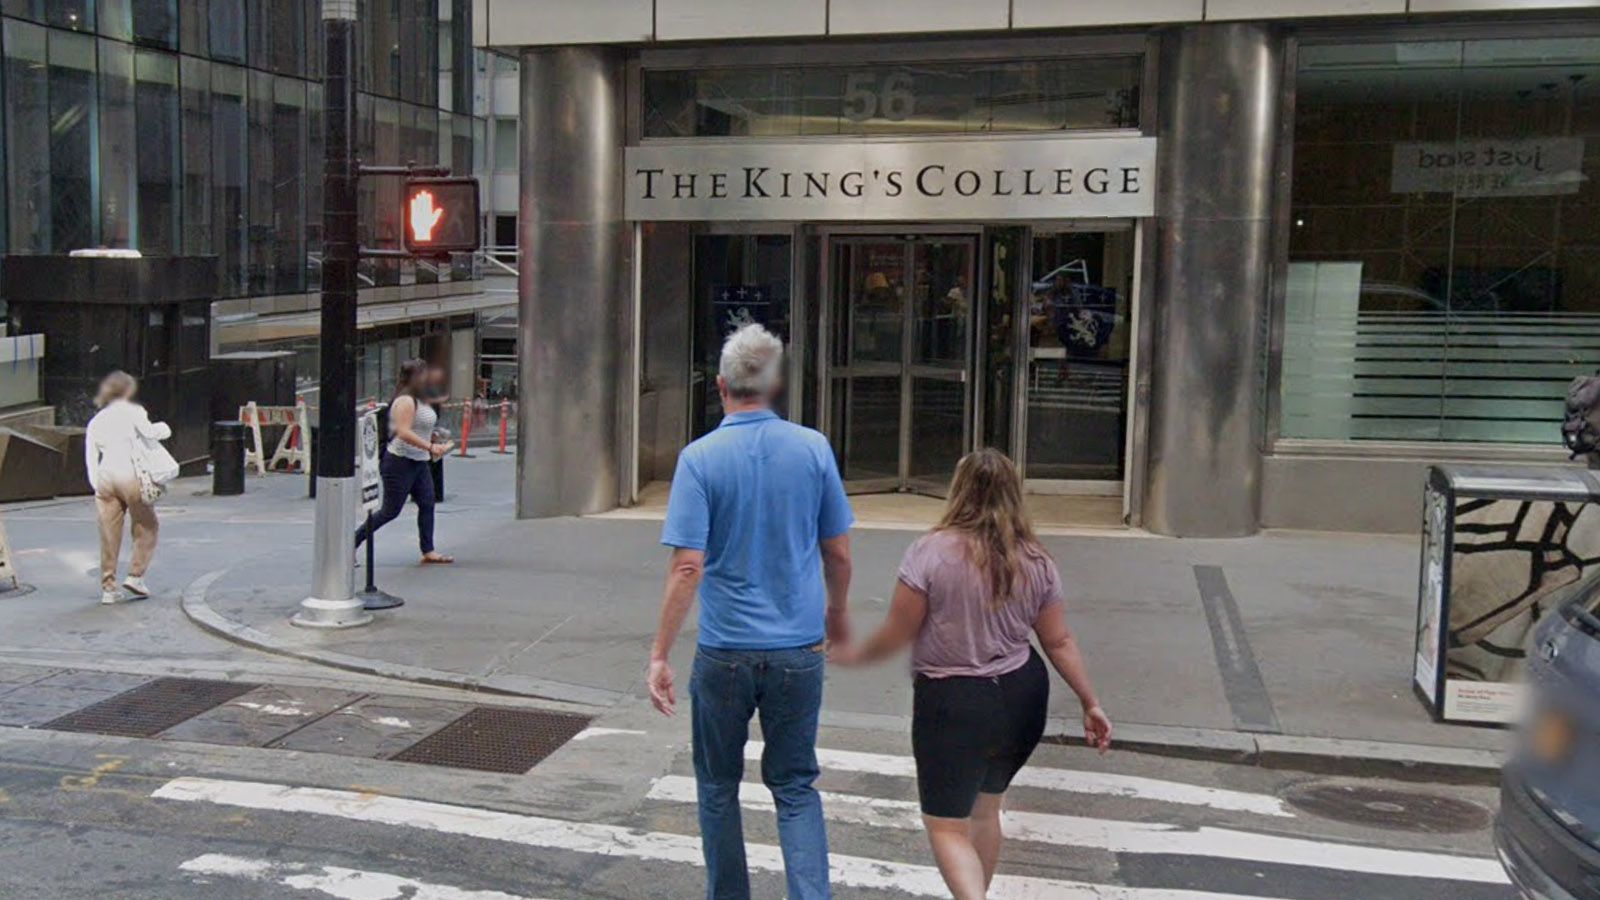 The King's College is located in Manhattan's financial district in New York City. Image courtesy of Google Maps